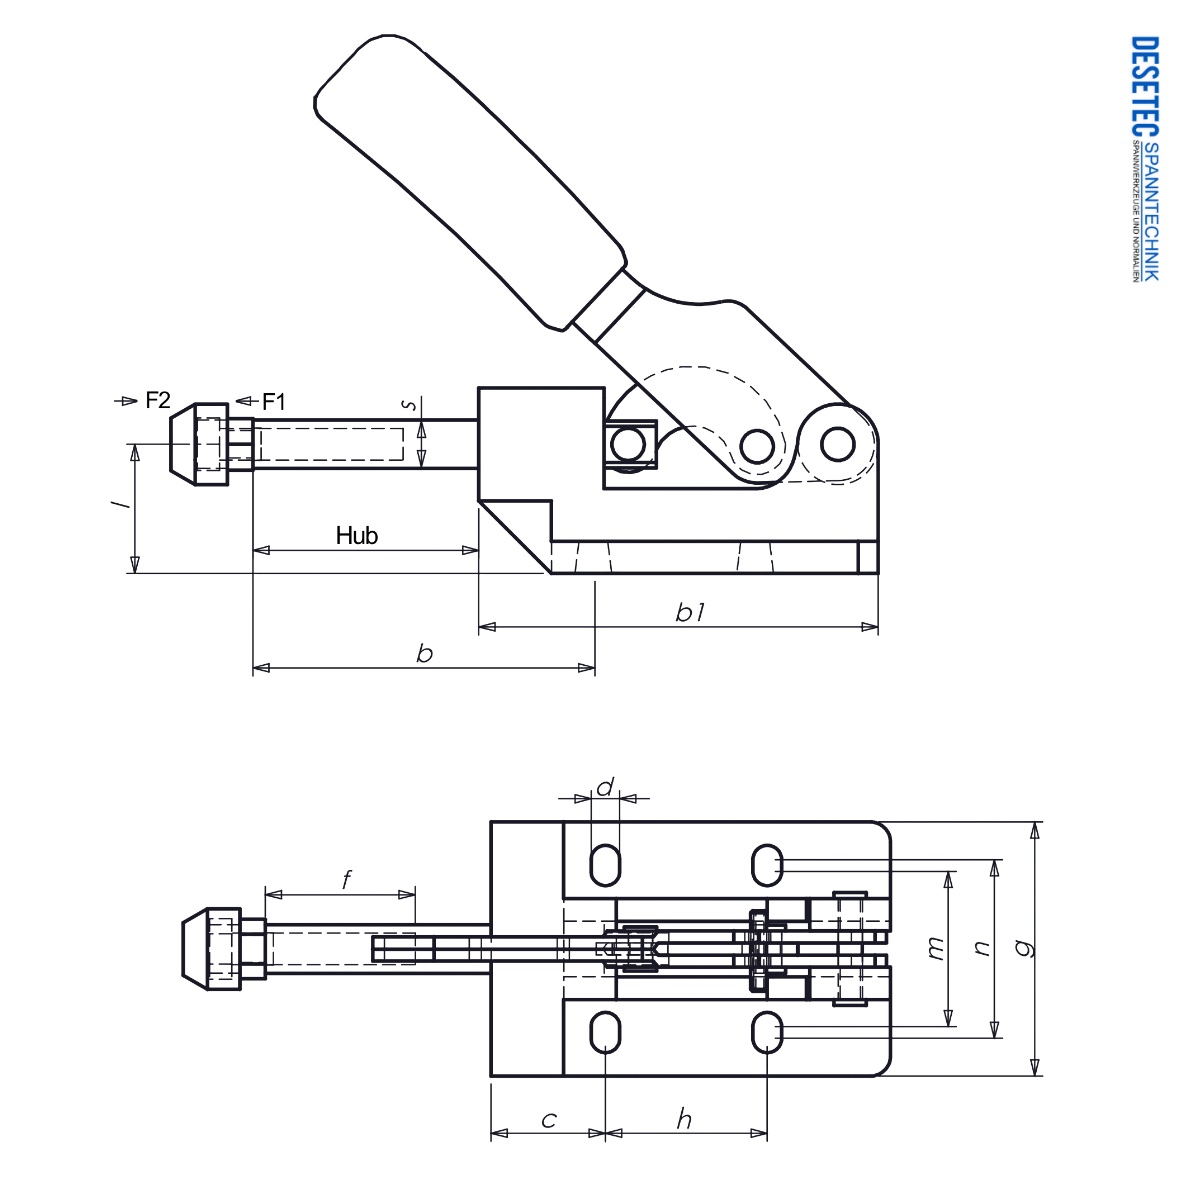 M64 Technical Drawing Heavy duty push-pull type toggle clamp with malleable cast iron, varnished body